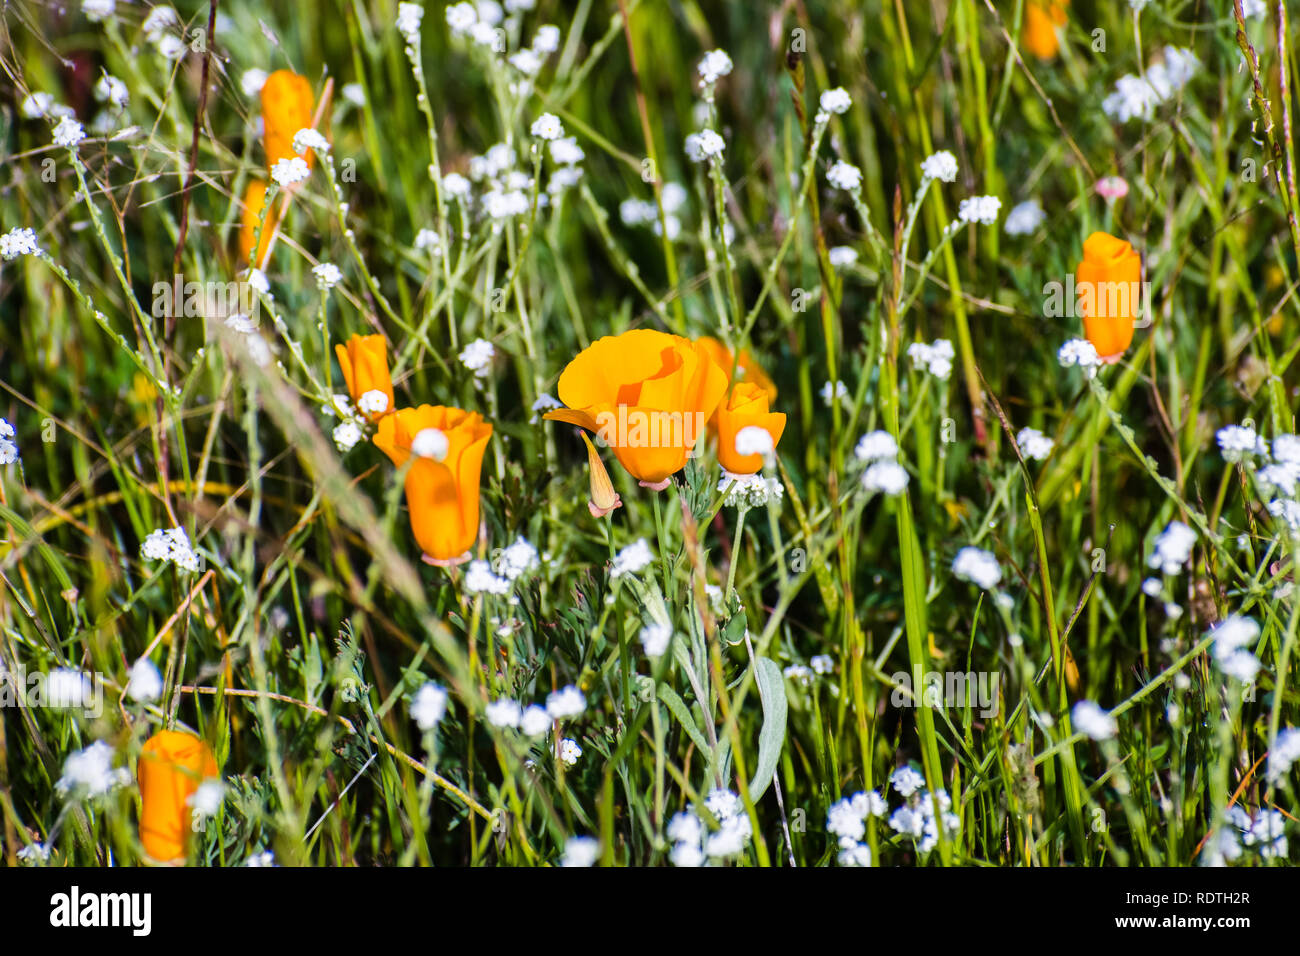 California poppy (Eschscholzia californica) and popcorn flowers (Plagiobothrys nothofulvus) blooming on a meadow in Santa Clara county, south San Fran Stock Photo